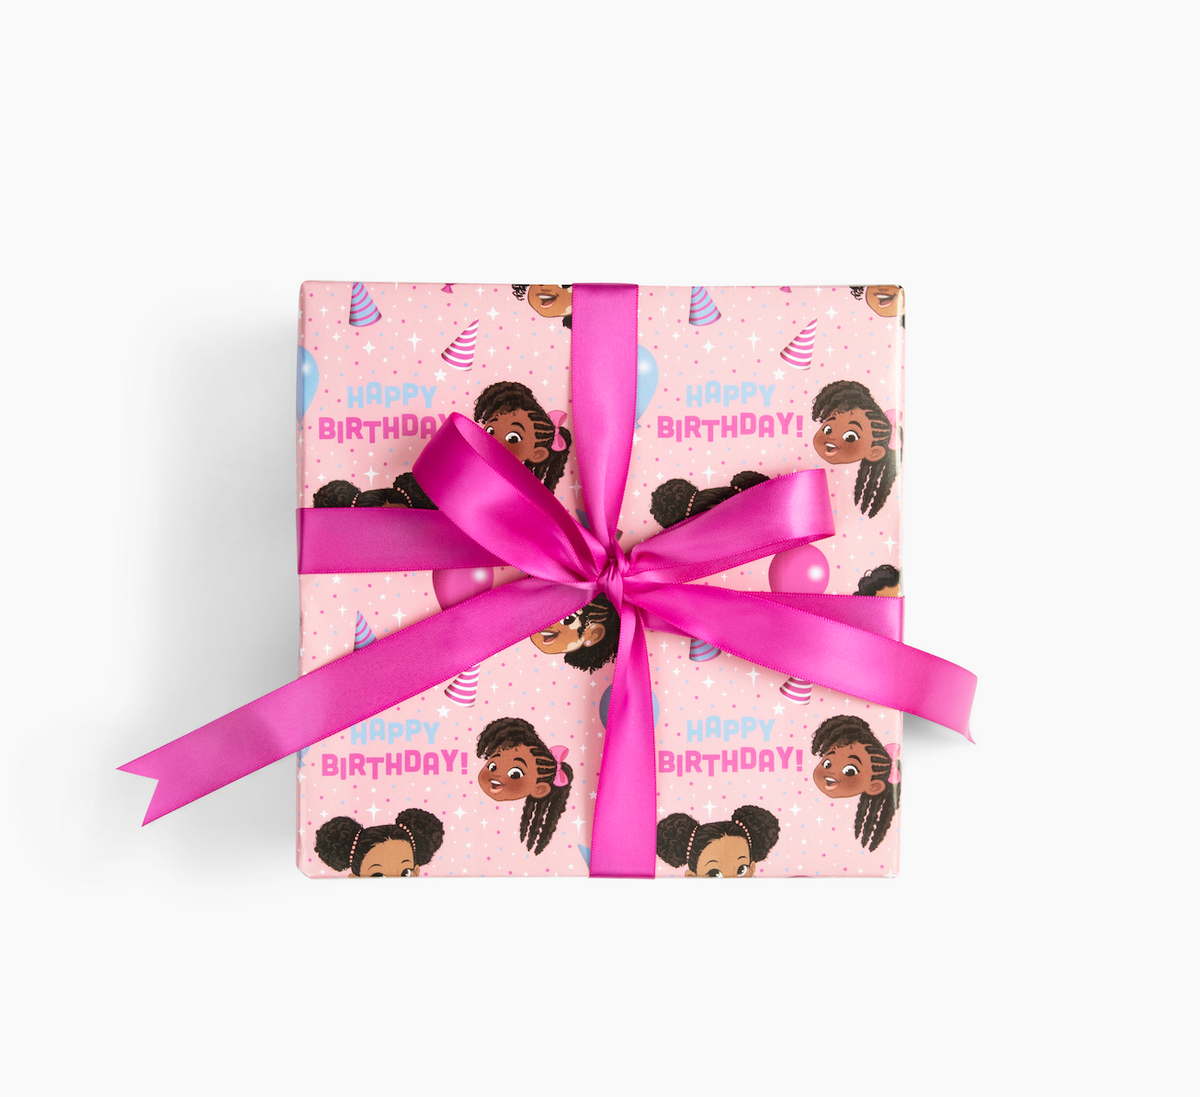 Happy Birthday! Pink Balloons Gift Wrap - The Shade Room Shop